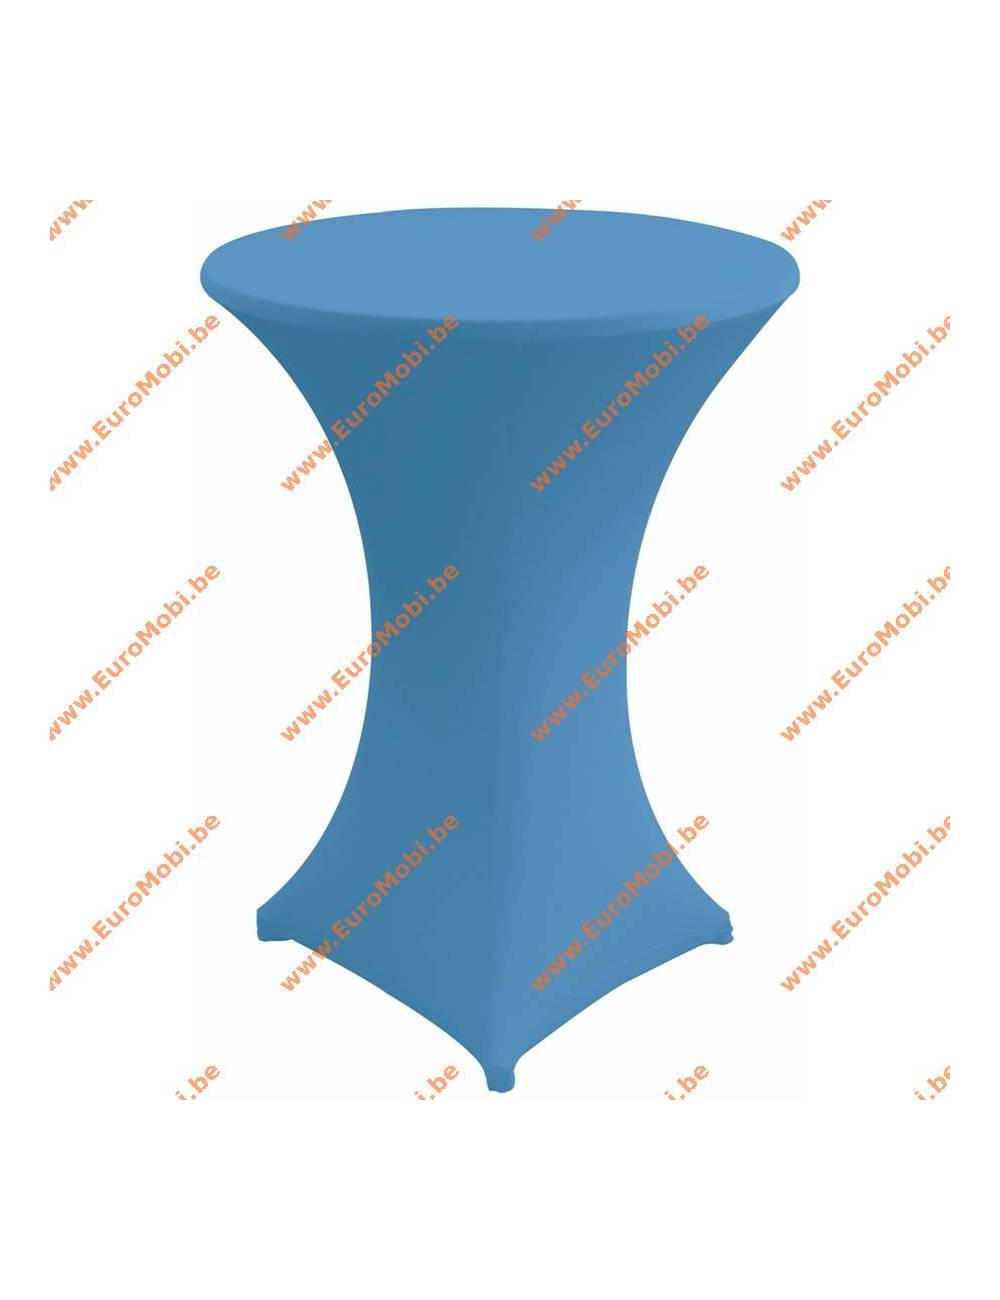 Cover and top stretch for standing table round ligth blue